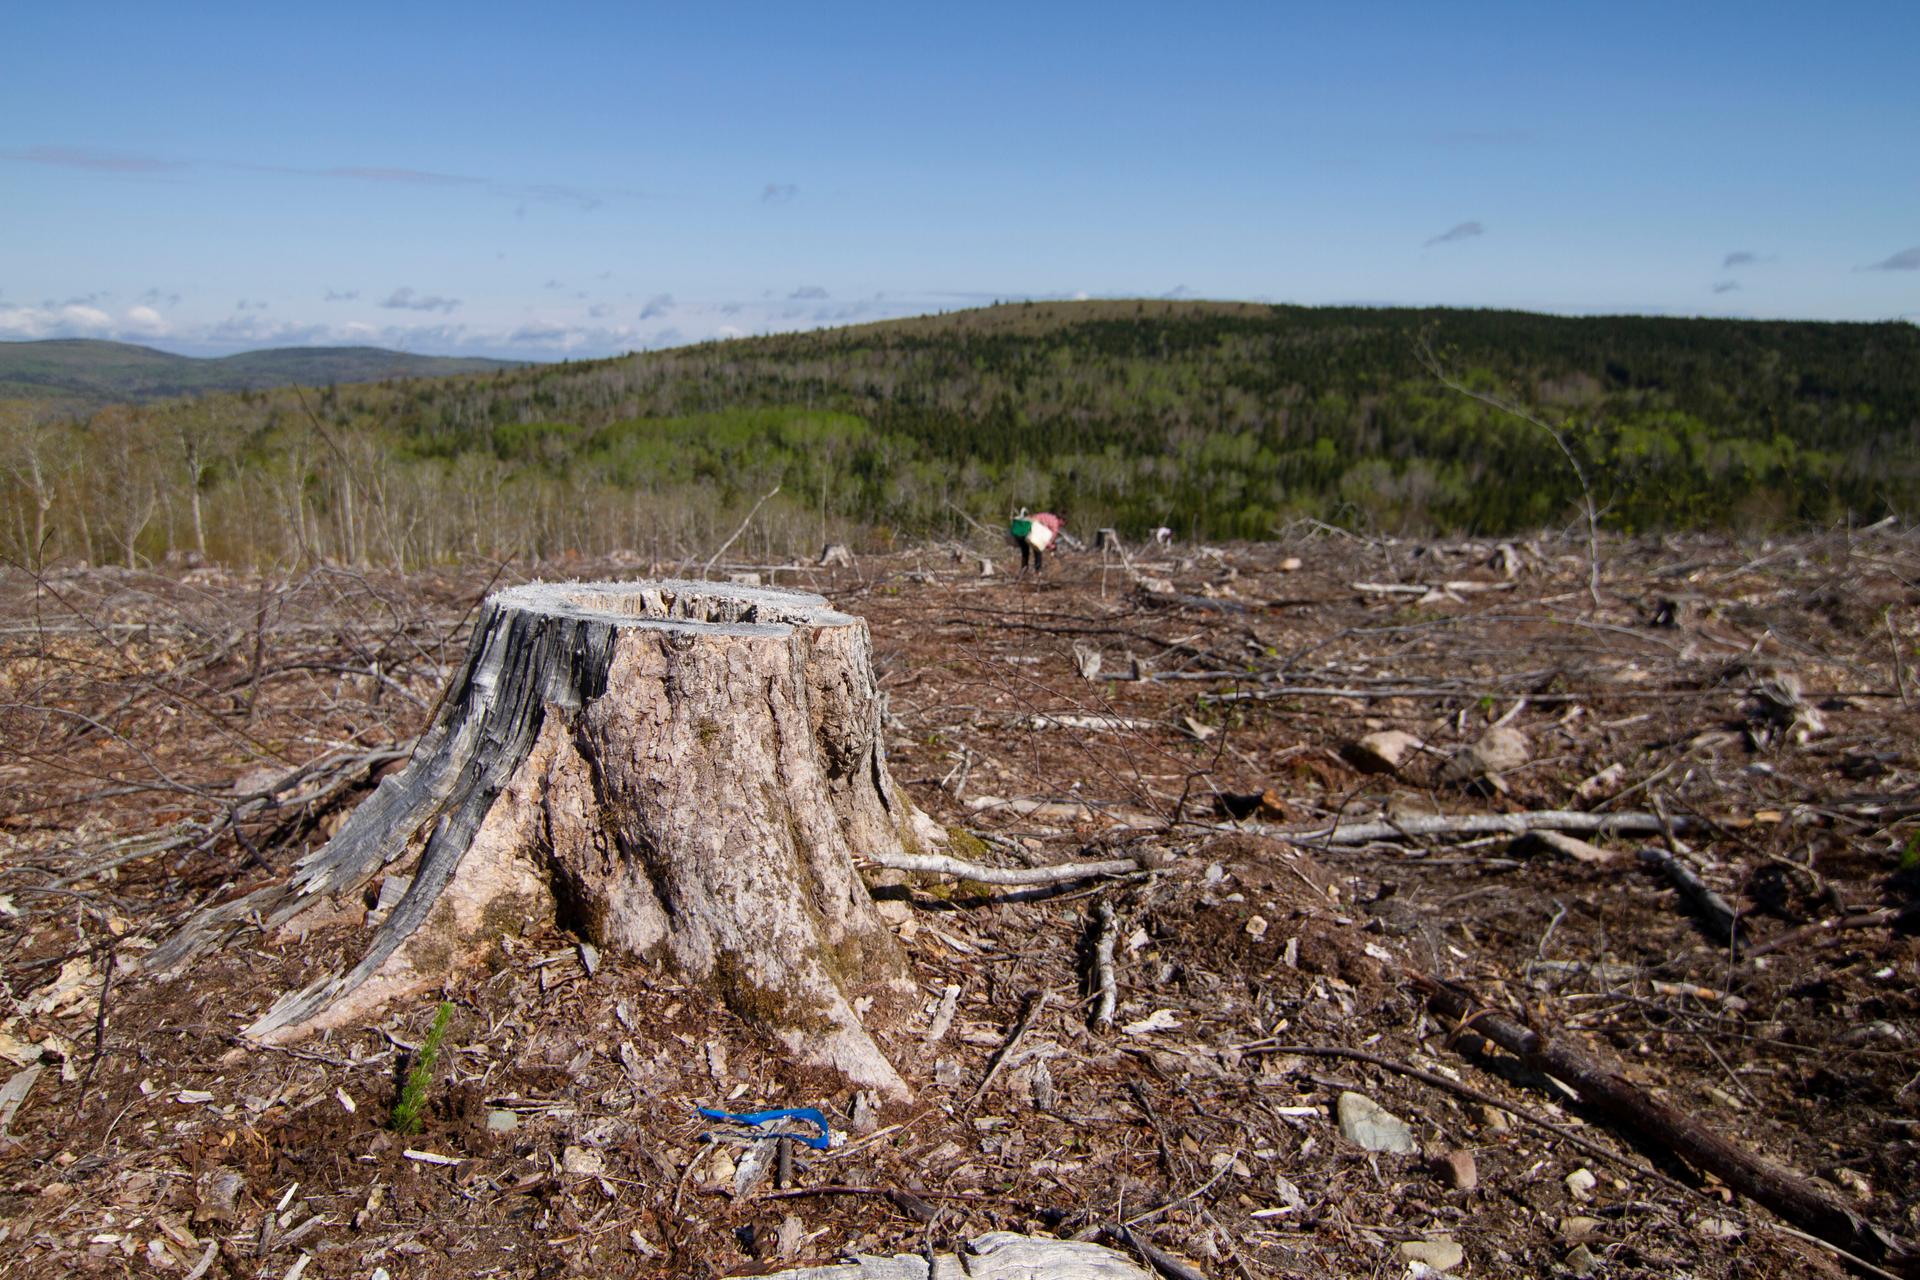 Much of the Maritimes forests are clear cut for timber sales. Community Forests International wants to break that cycle of forest management and provide landowners with an alternative way of getting income from their woods through carbon offsets.